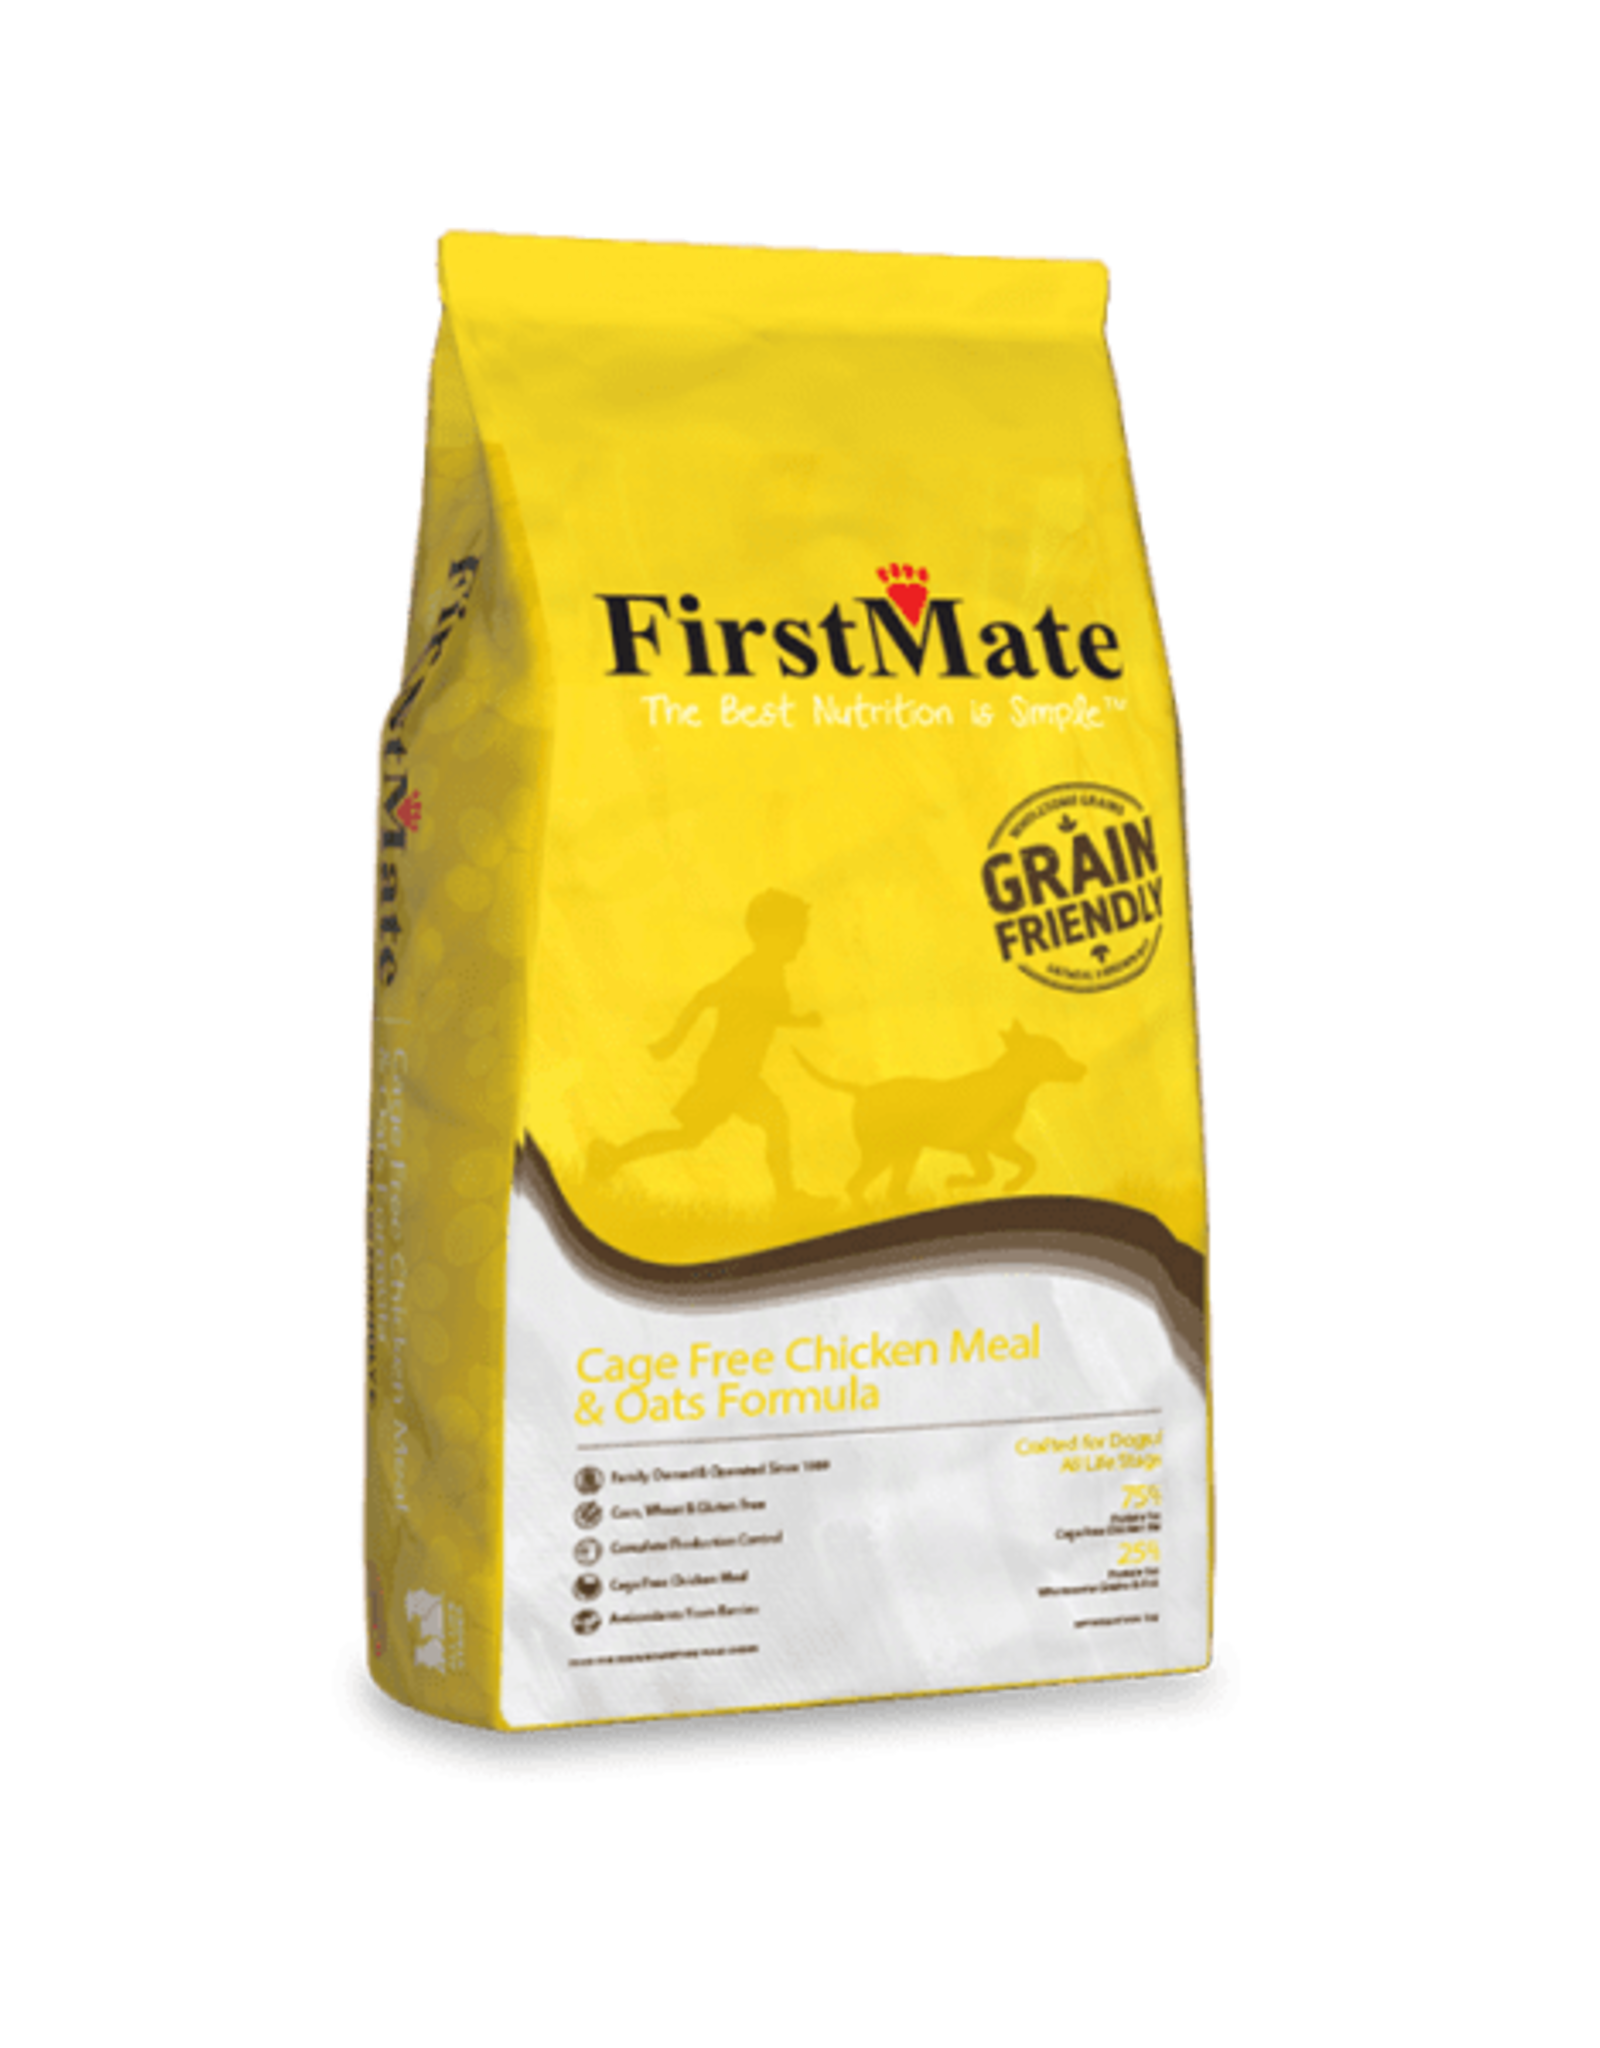 FirstMate FirstMate Cage Free Chicken Meal & Oats